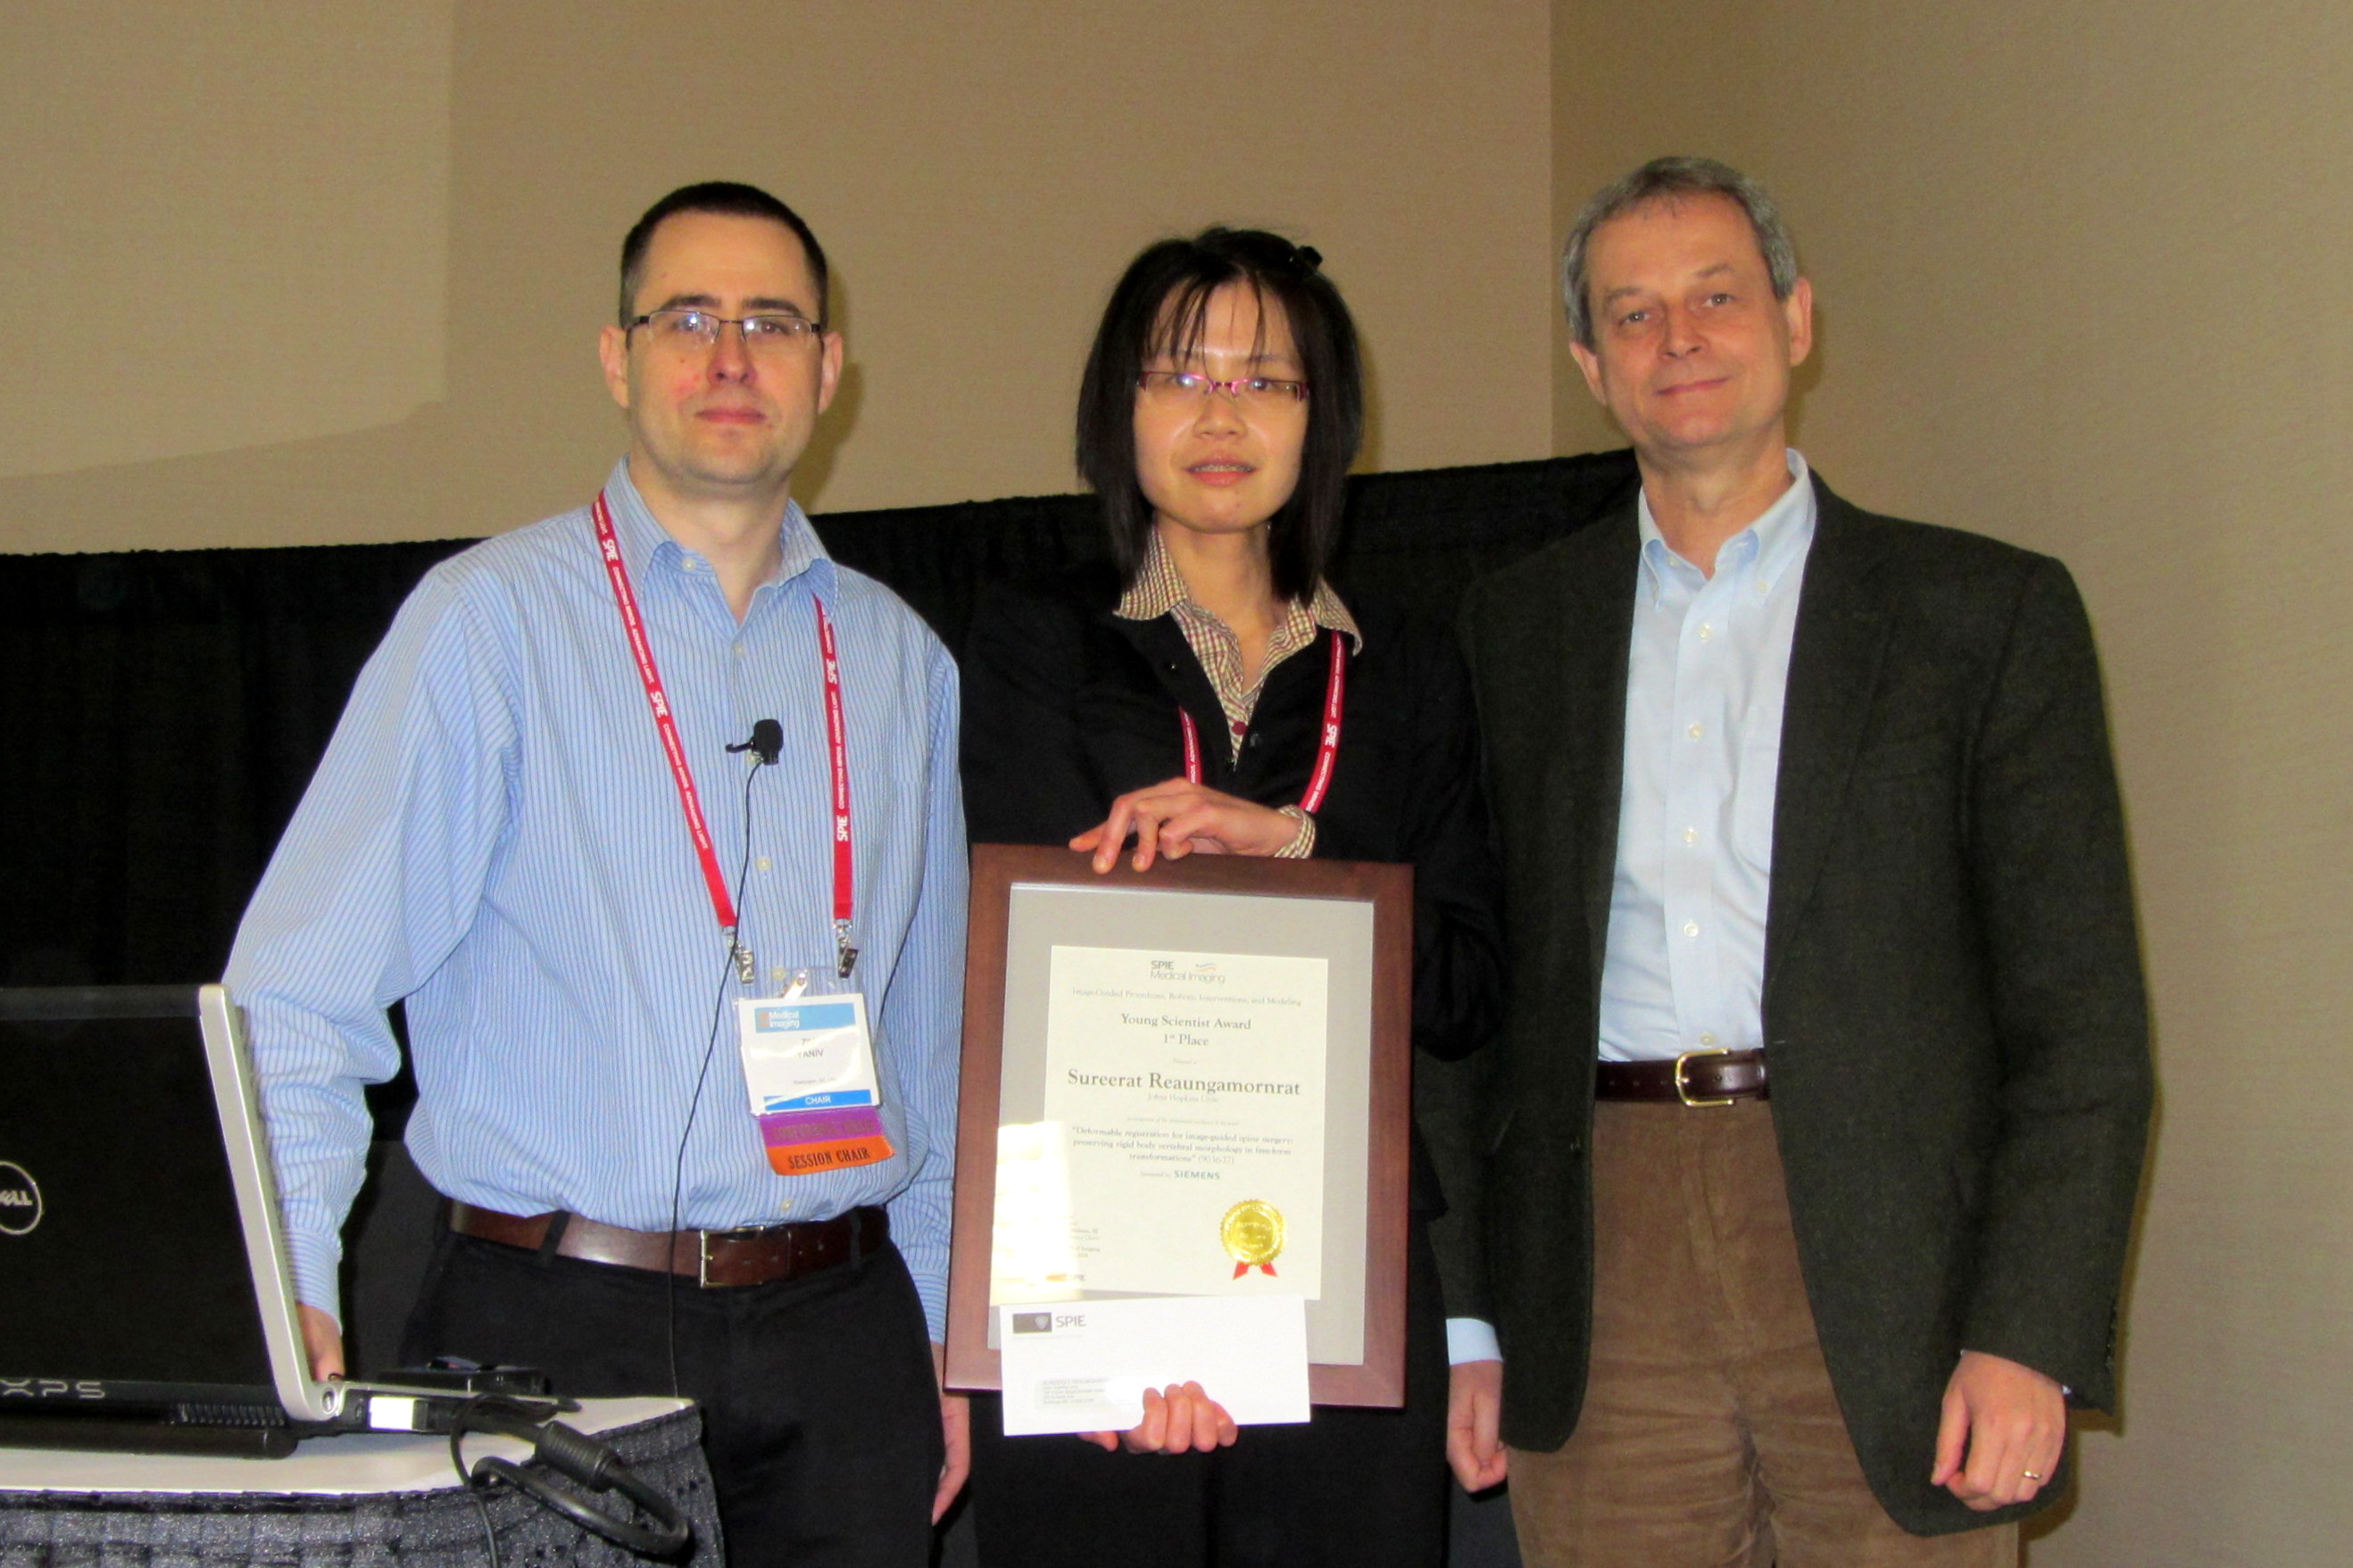 SPIE 2014: Image-Guided Procedures Young Scientist Award